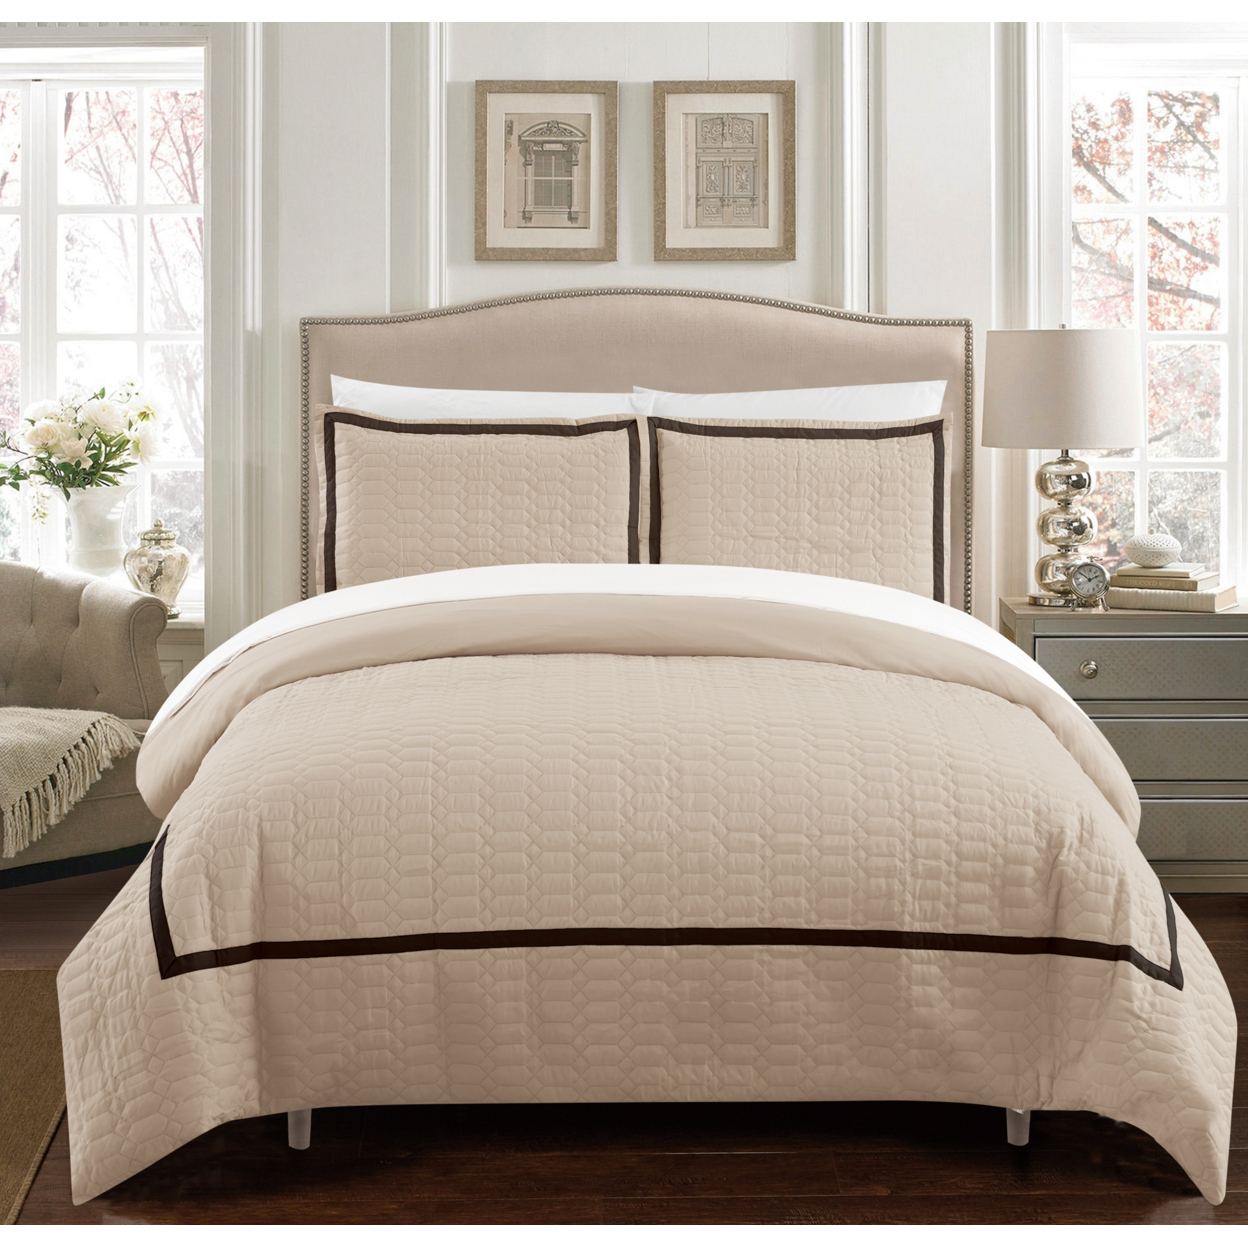 Dawn 2 Piece Duvet Cover Set Hotel Collection Two Tone Banded Print Zipper Closure - Beige, Queen